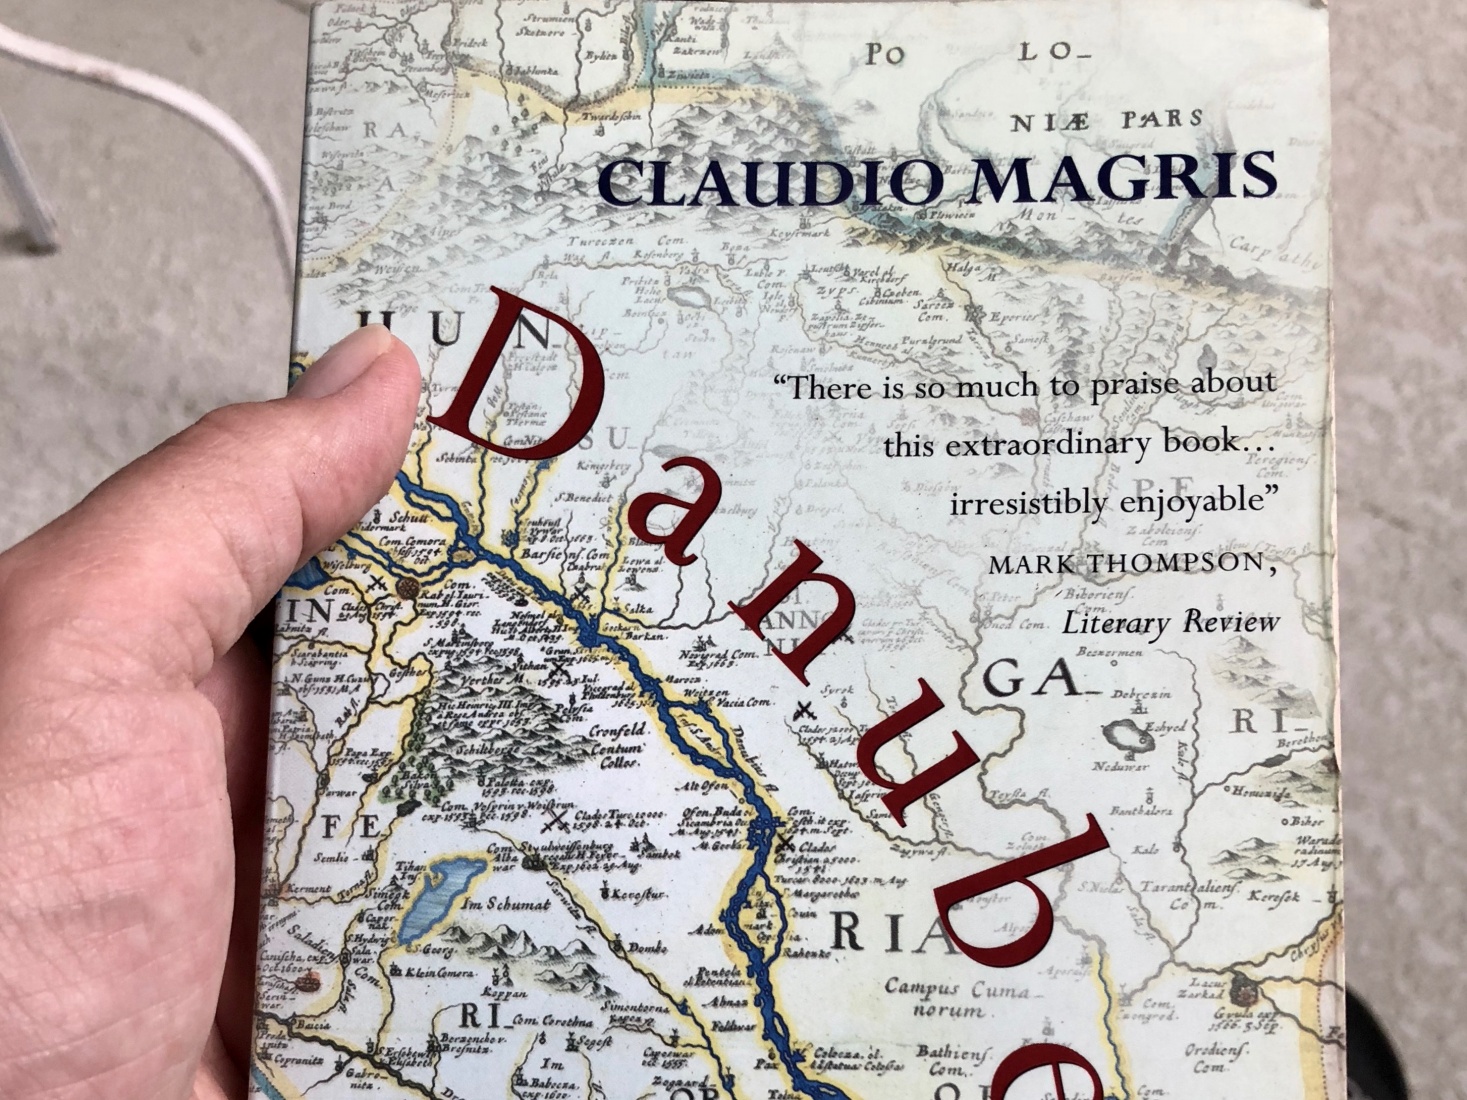 Claudio Magris's “Danube: A Sentimental Journey from the Source to the Black Sea,” published 1986.